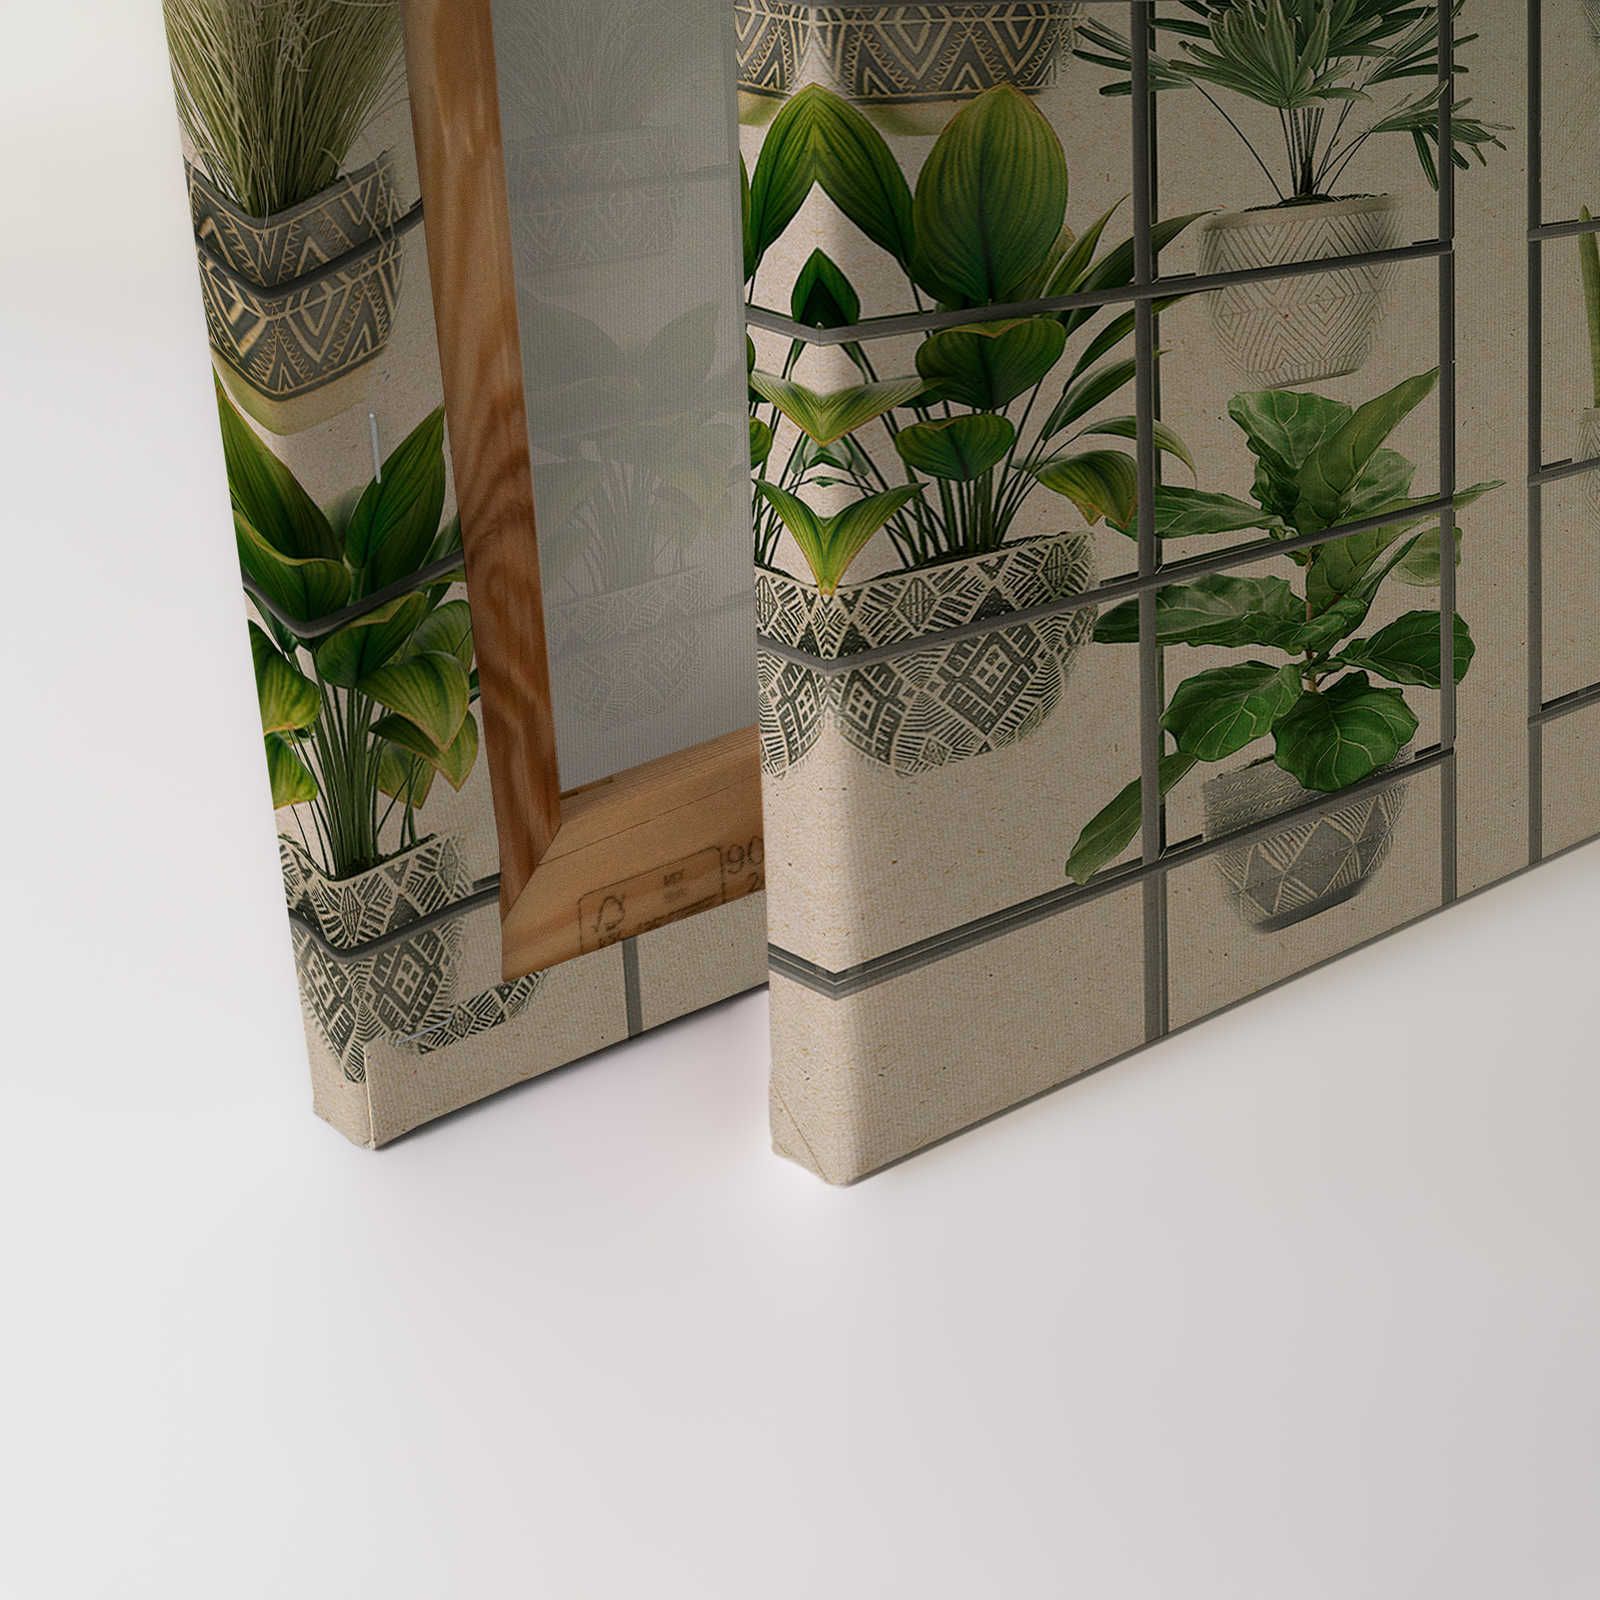             Plant Shop 2 - Canvas painting modern plant wall in green & grey - 1.20 m x 0.80 m
        